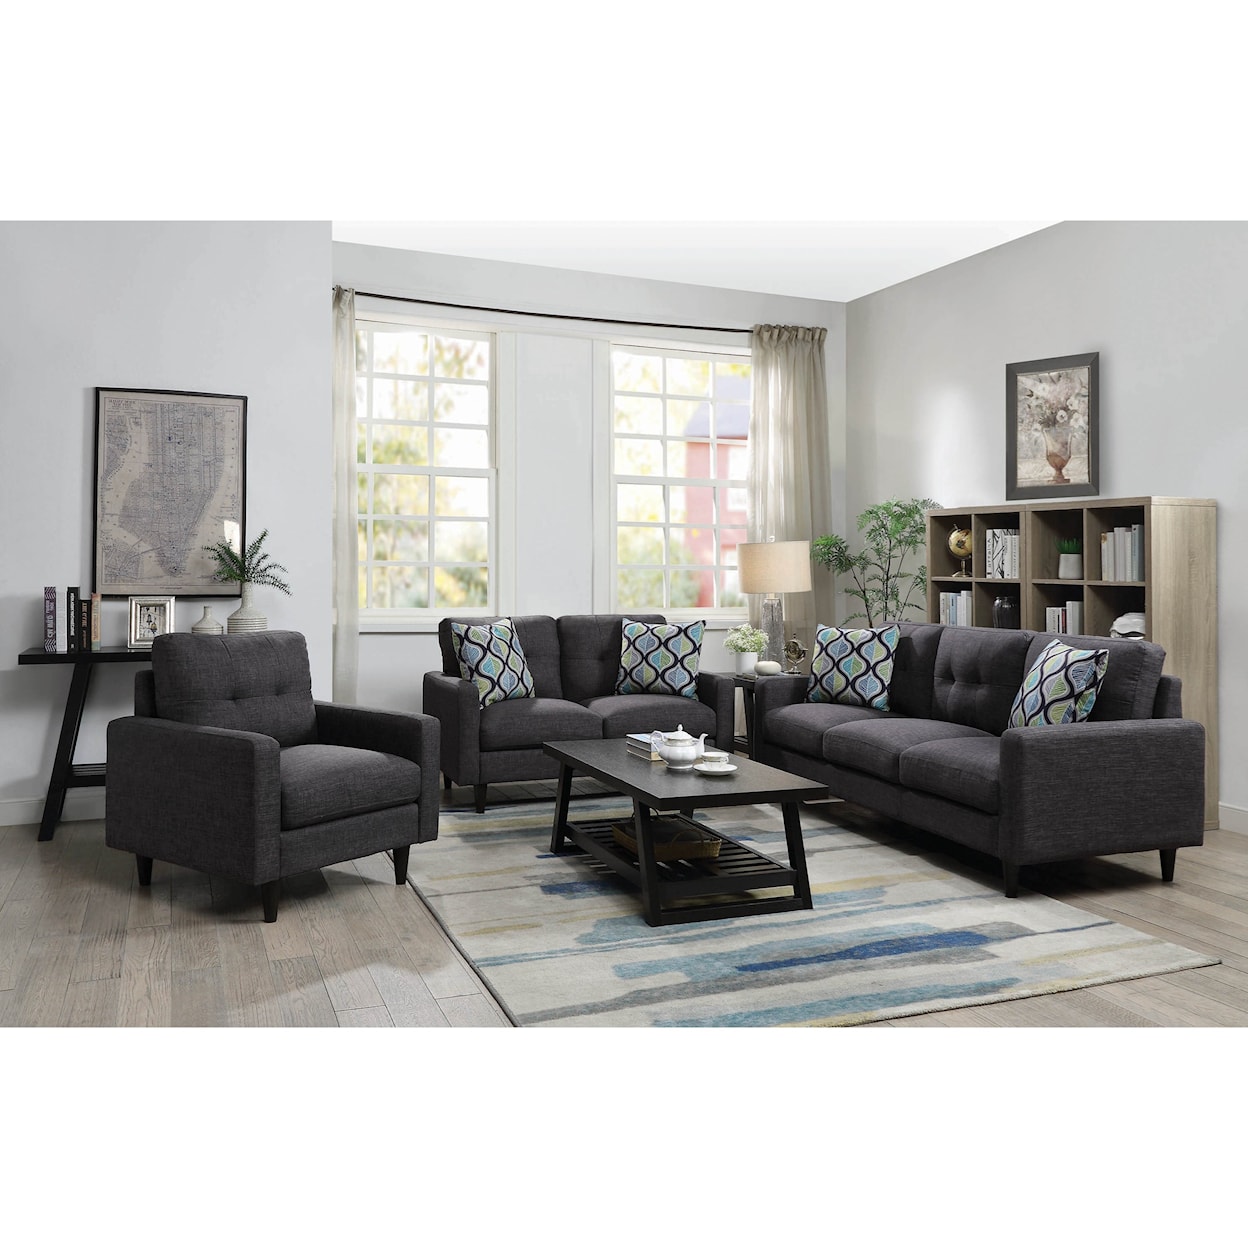 Coaster Watsonville 3pc living room group